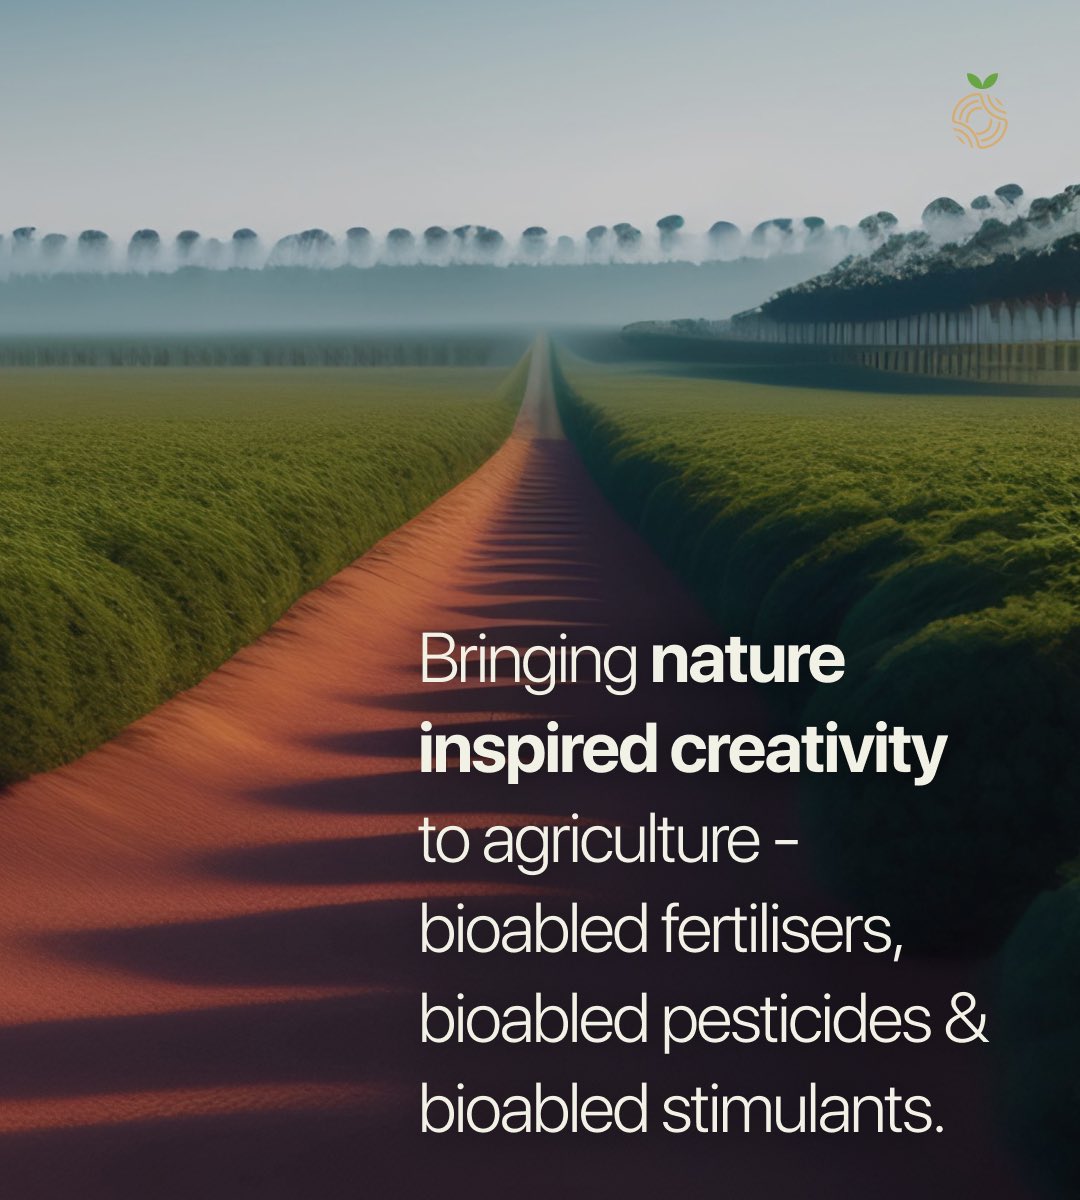 Making progressive, sustainable agriculture a universal norm. On every acre, globally. 

#farminputs #inerabyabsolute